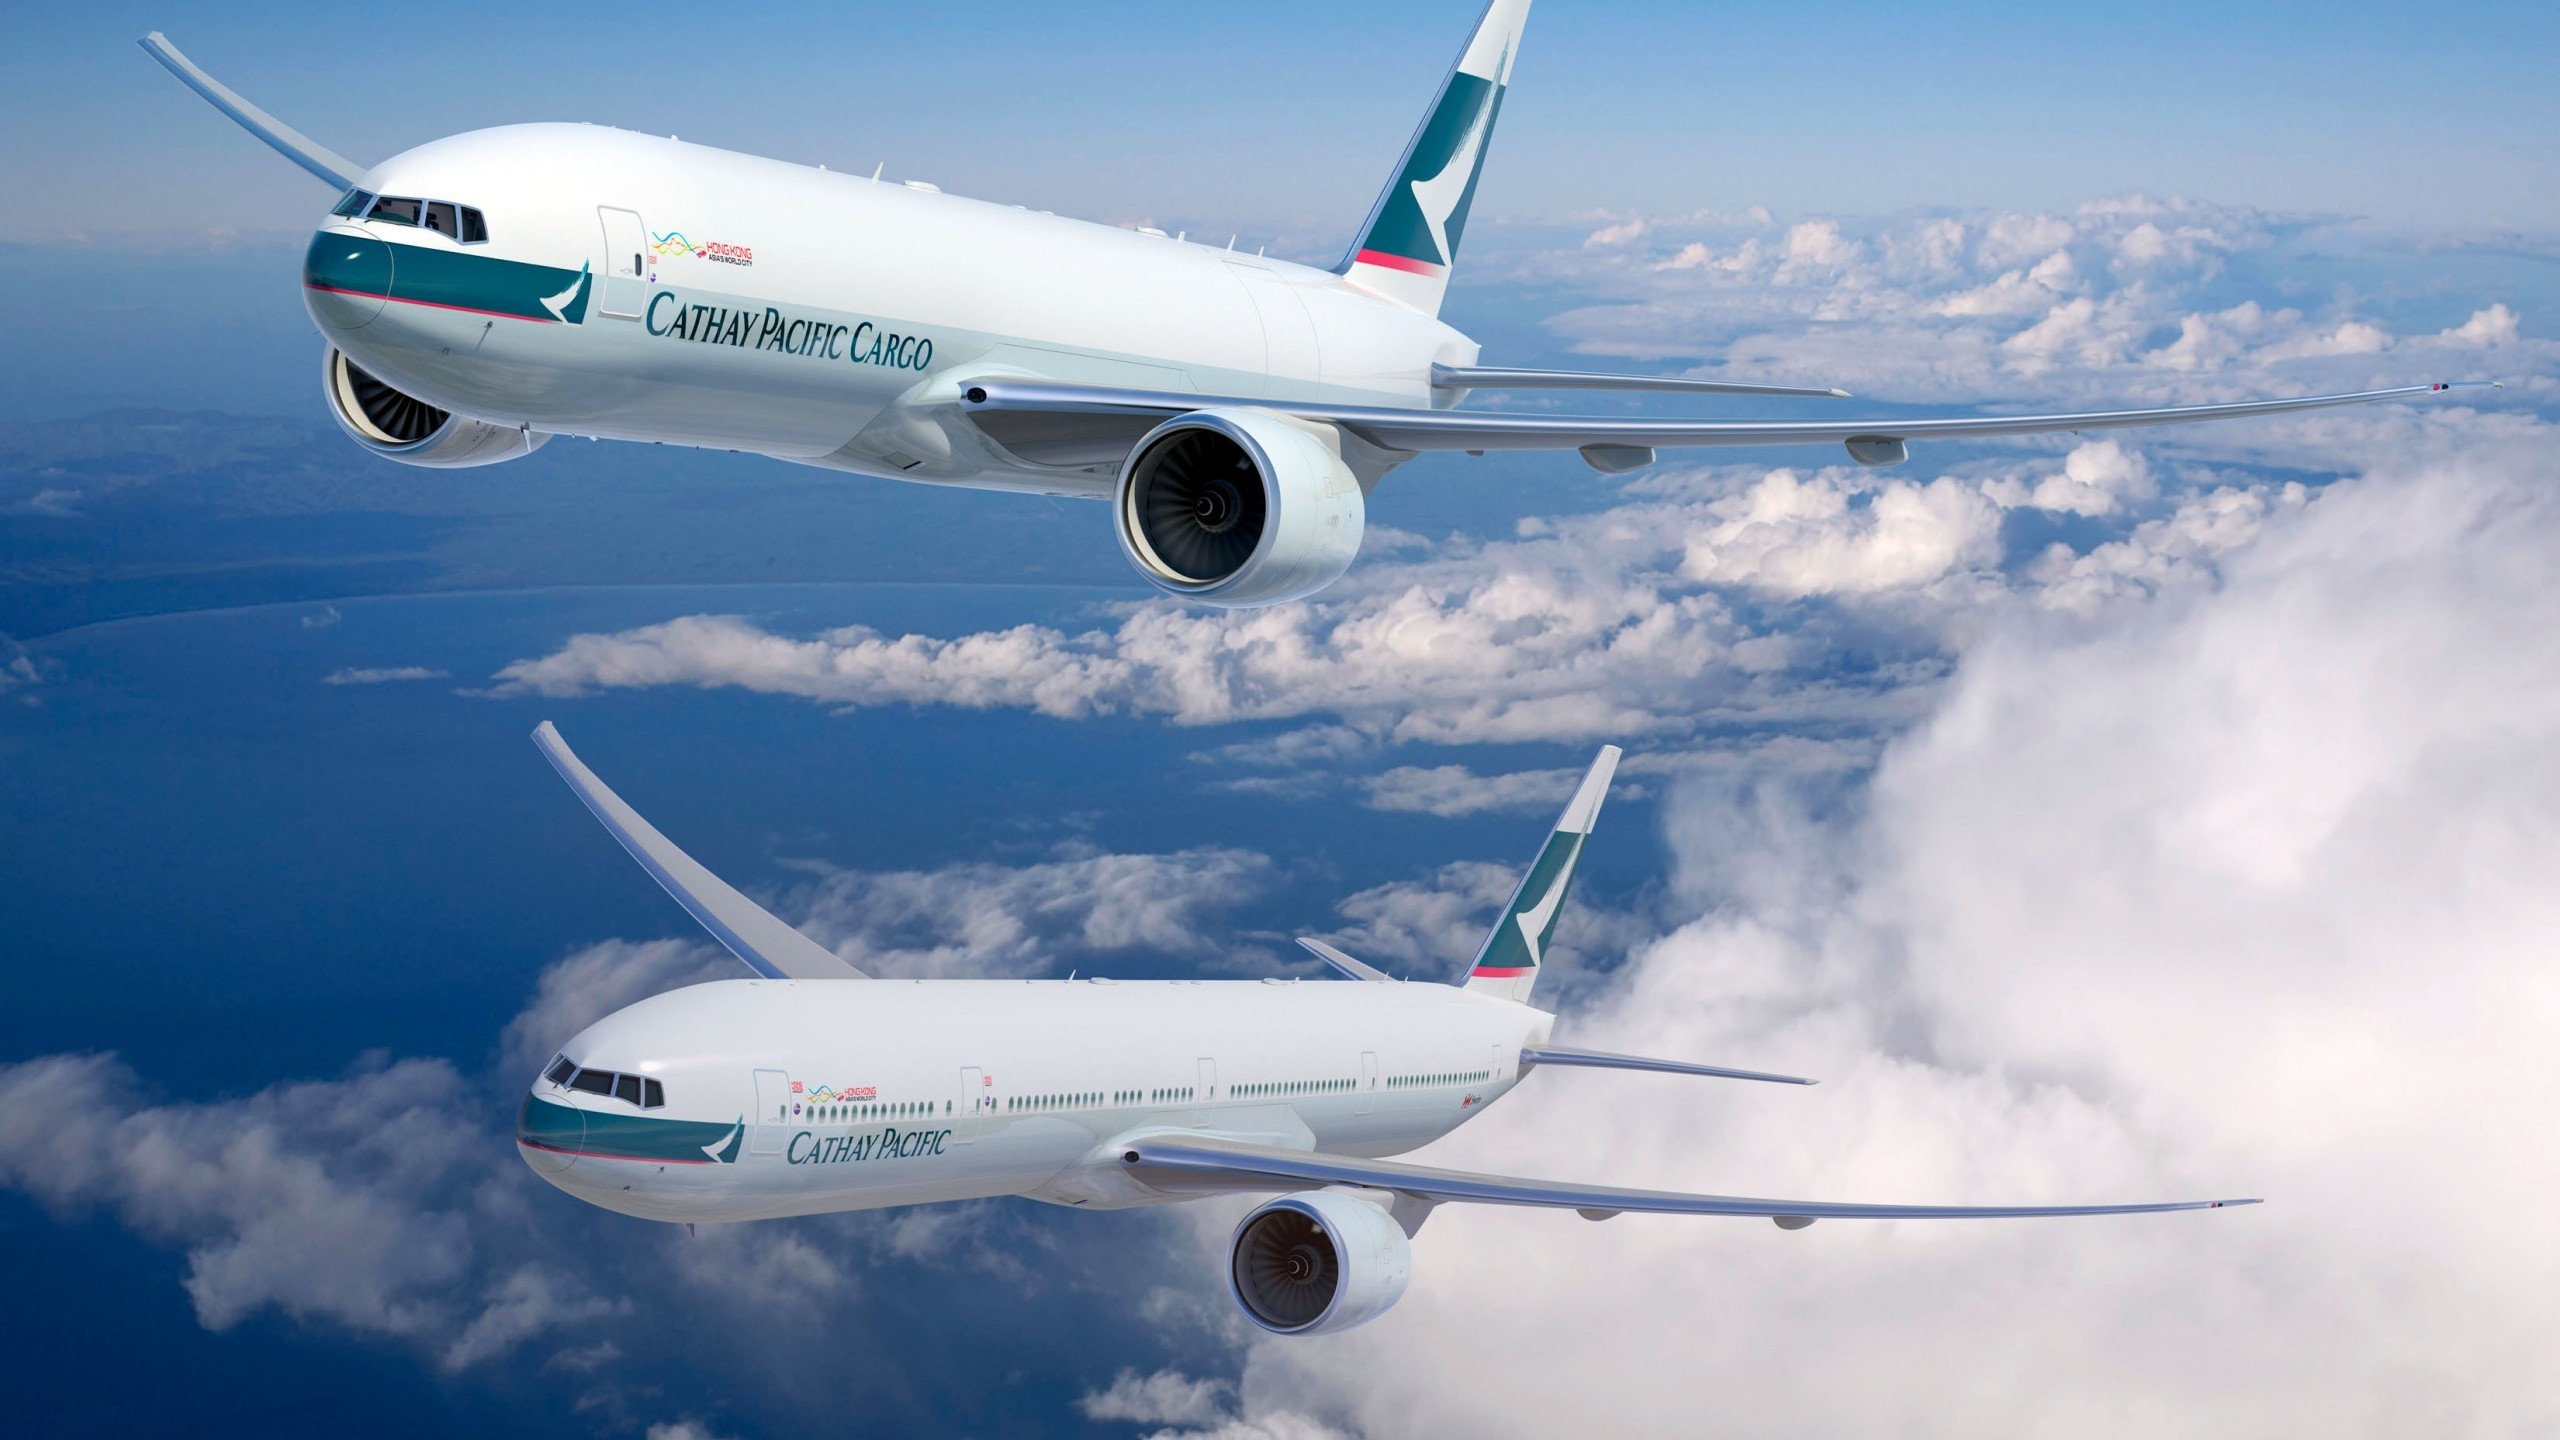 Cathay Pacific Boeing 777 for 2560x1440 HDTV resolution